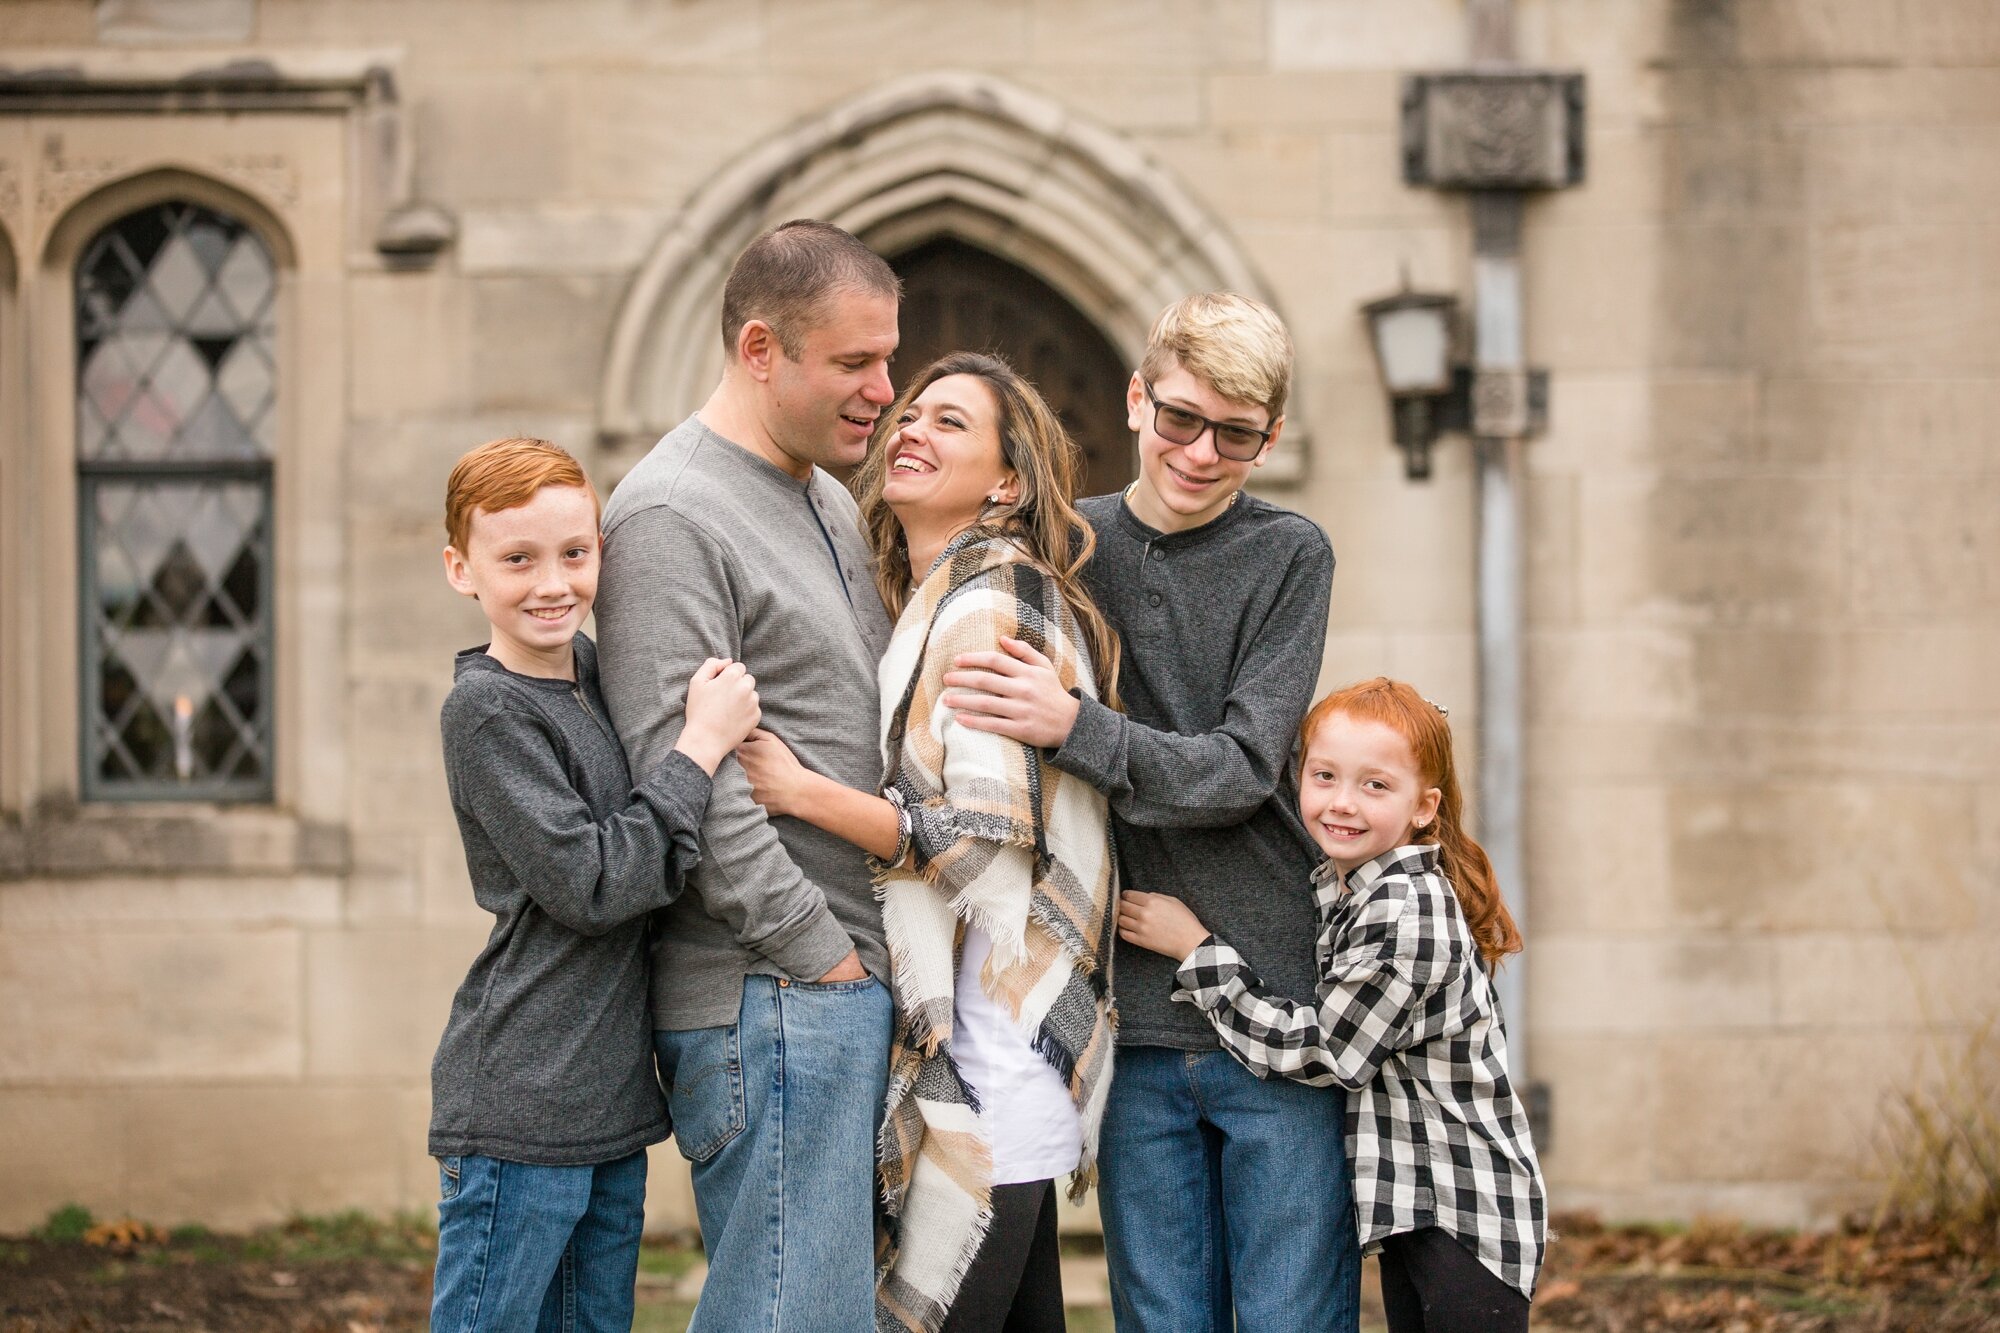 hartwood acres family photos, pittsburgh family photographer, cranberry township family photographer, winter family photos, what to wear for a winter photo shoot